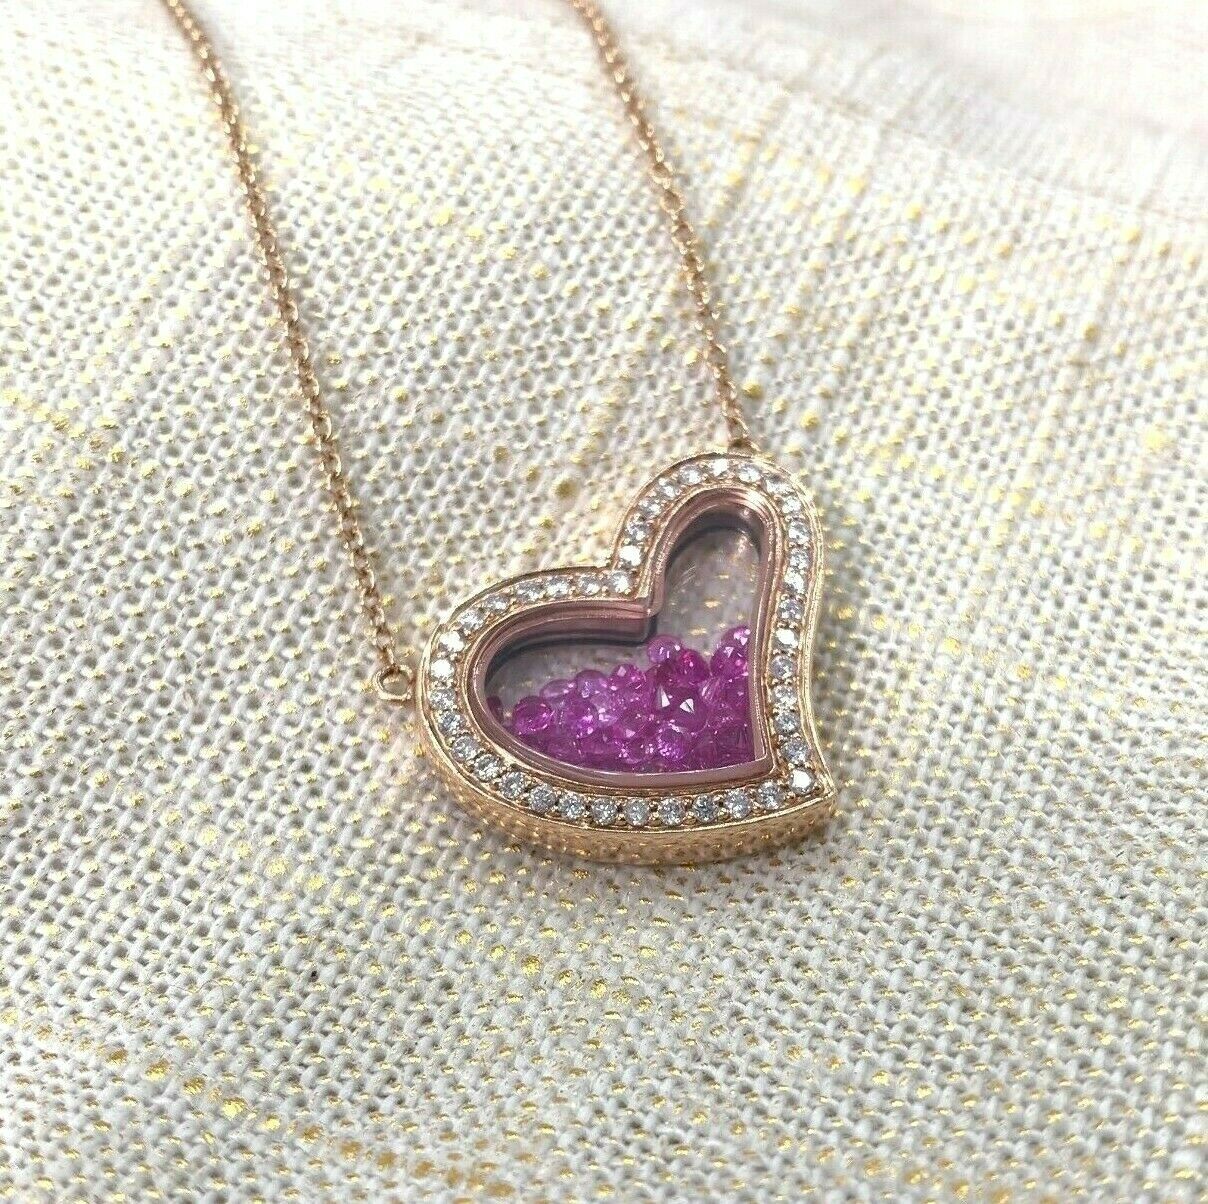 2.10 Carats t.w. Pink Sapphire and Diamond Heart Pendant 14K Rose Gold w Chain